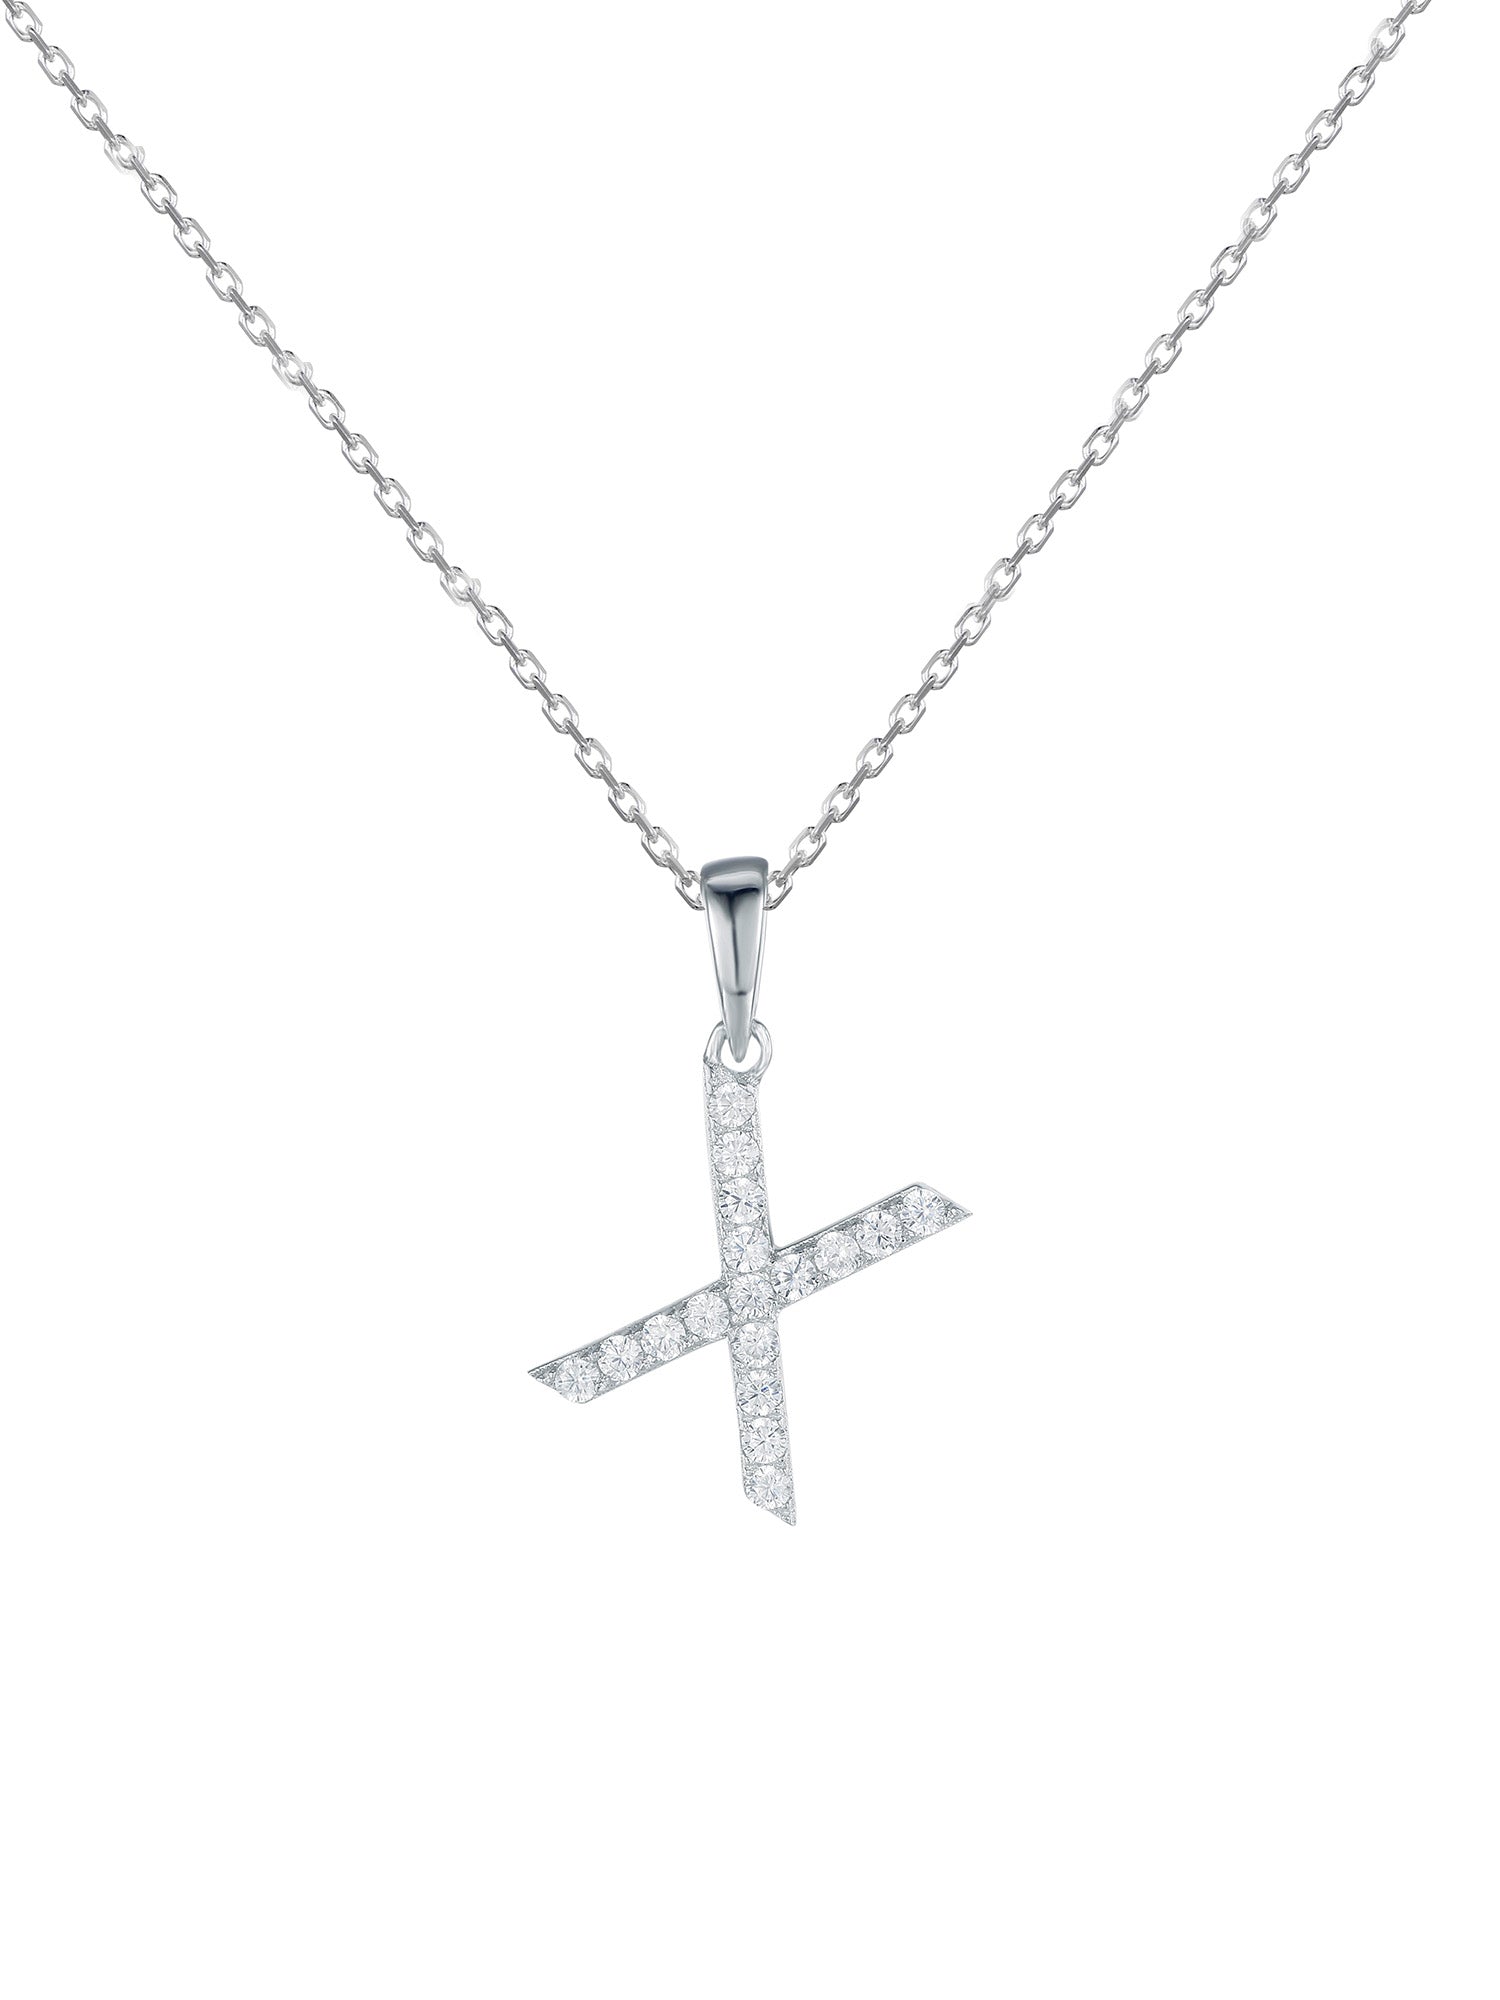 SILVER X INITIAL NECKLACE WITH AMERICAN DIAMONDS